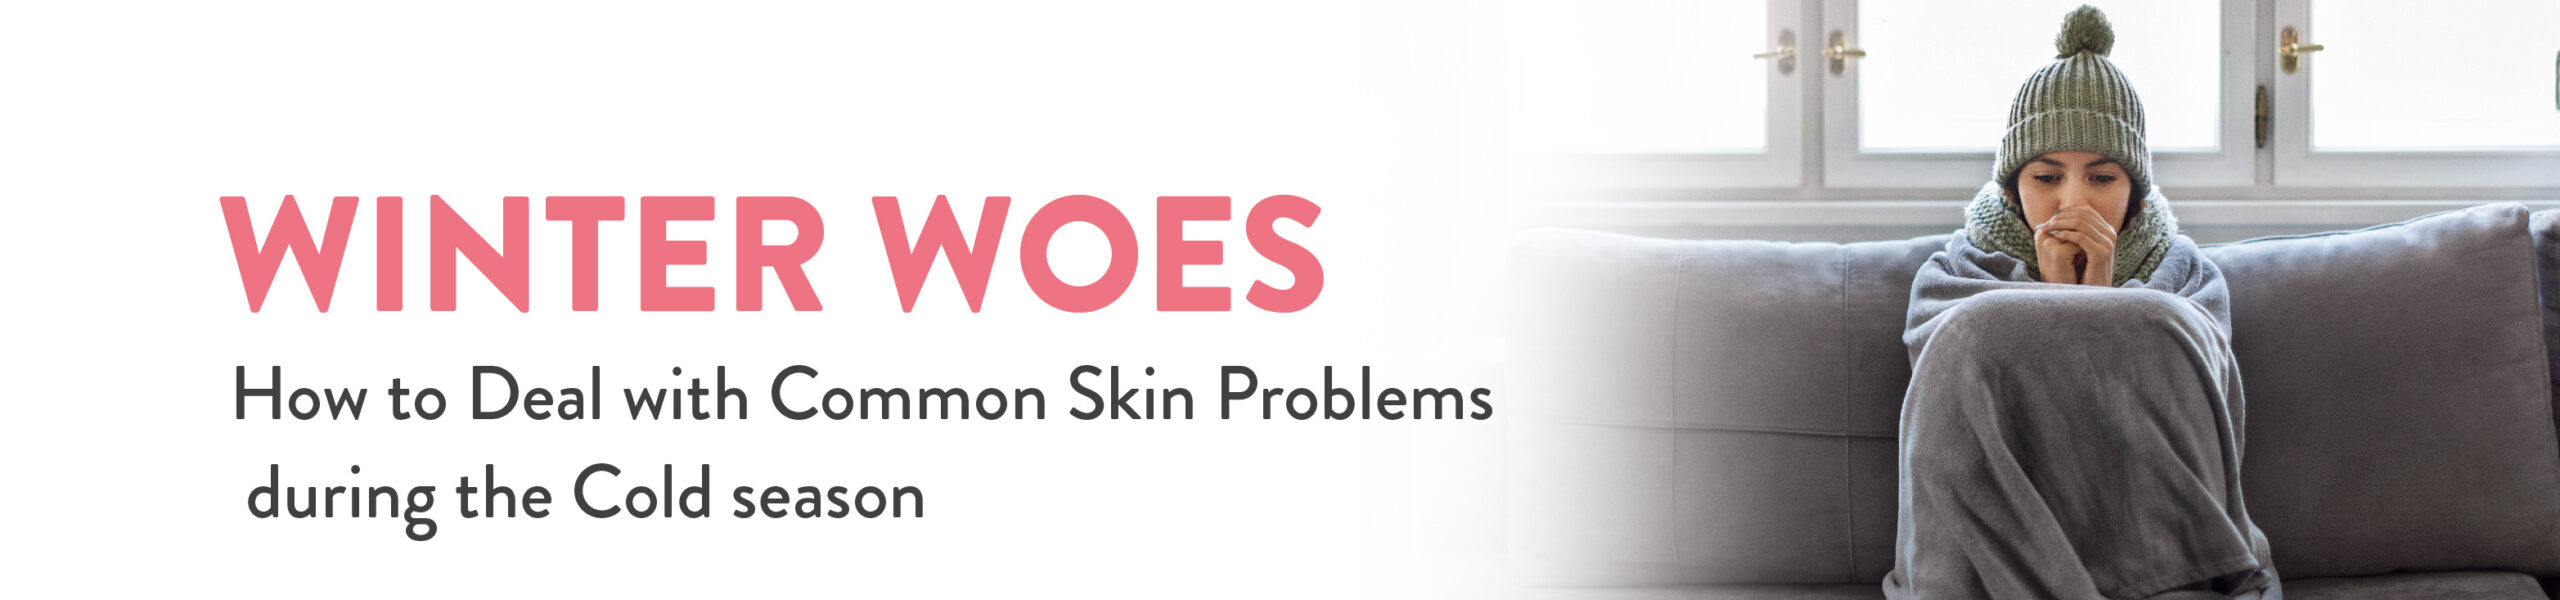 winter woes skin care